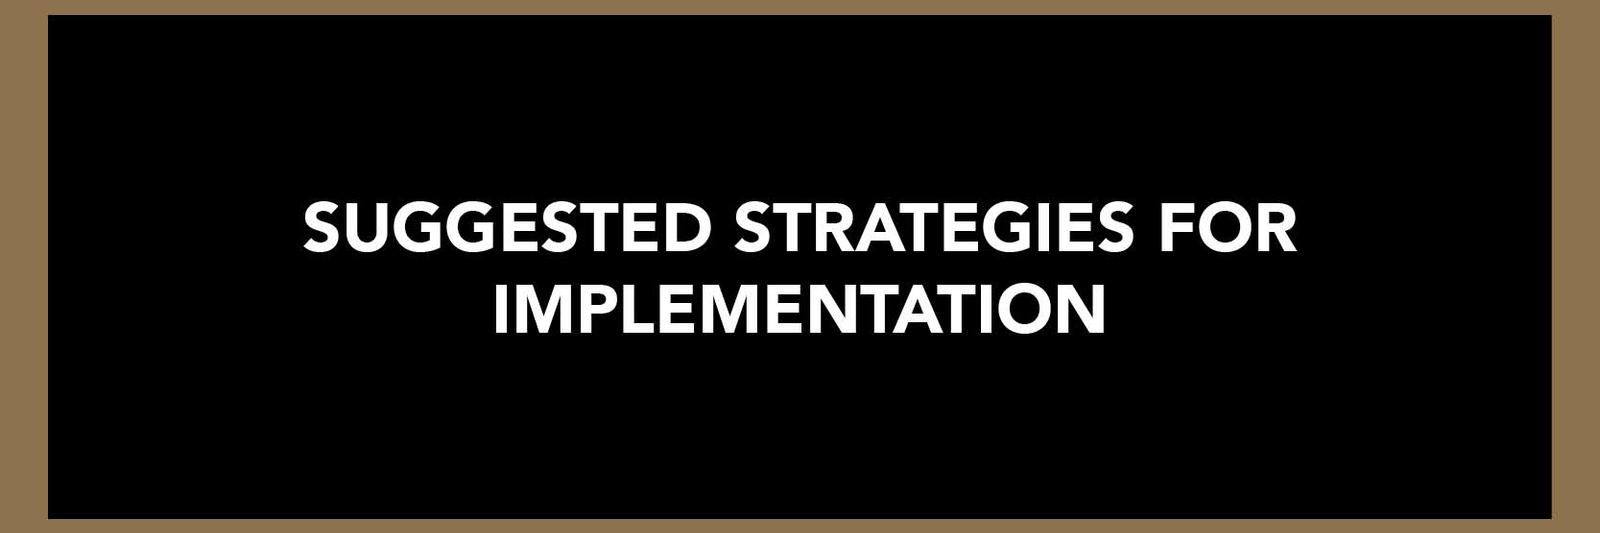 Suggested Strategies for Implementation